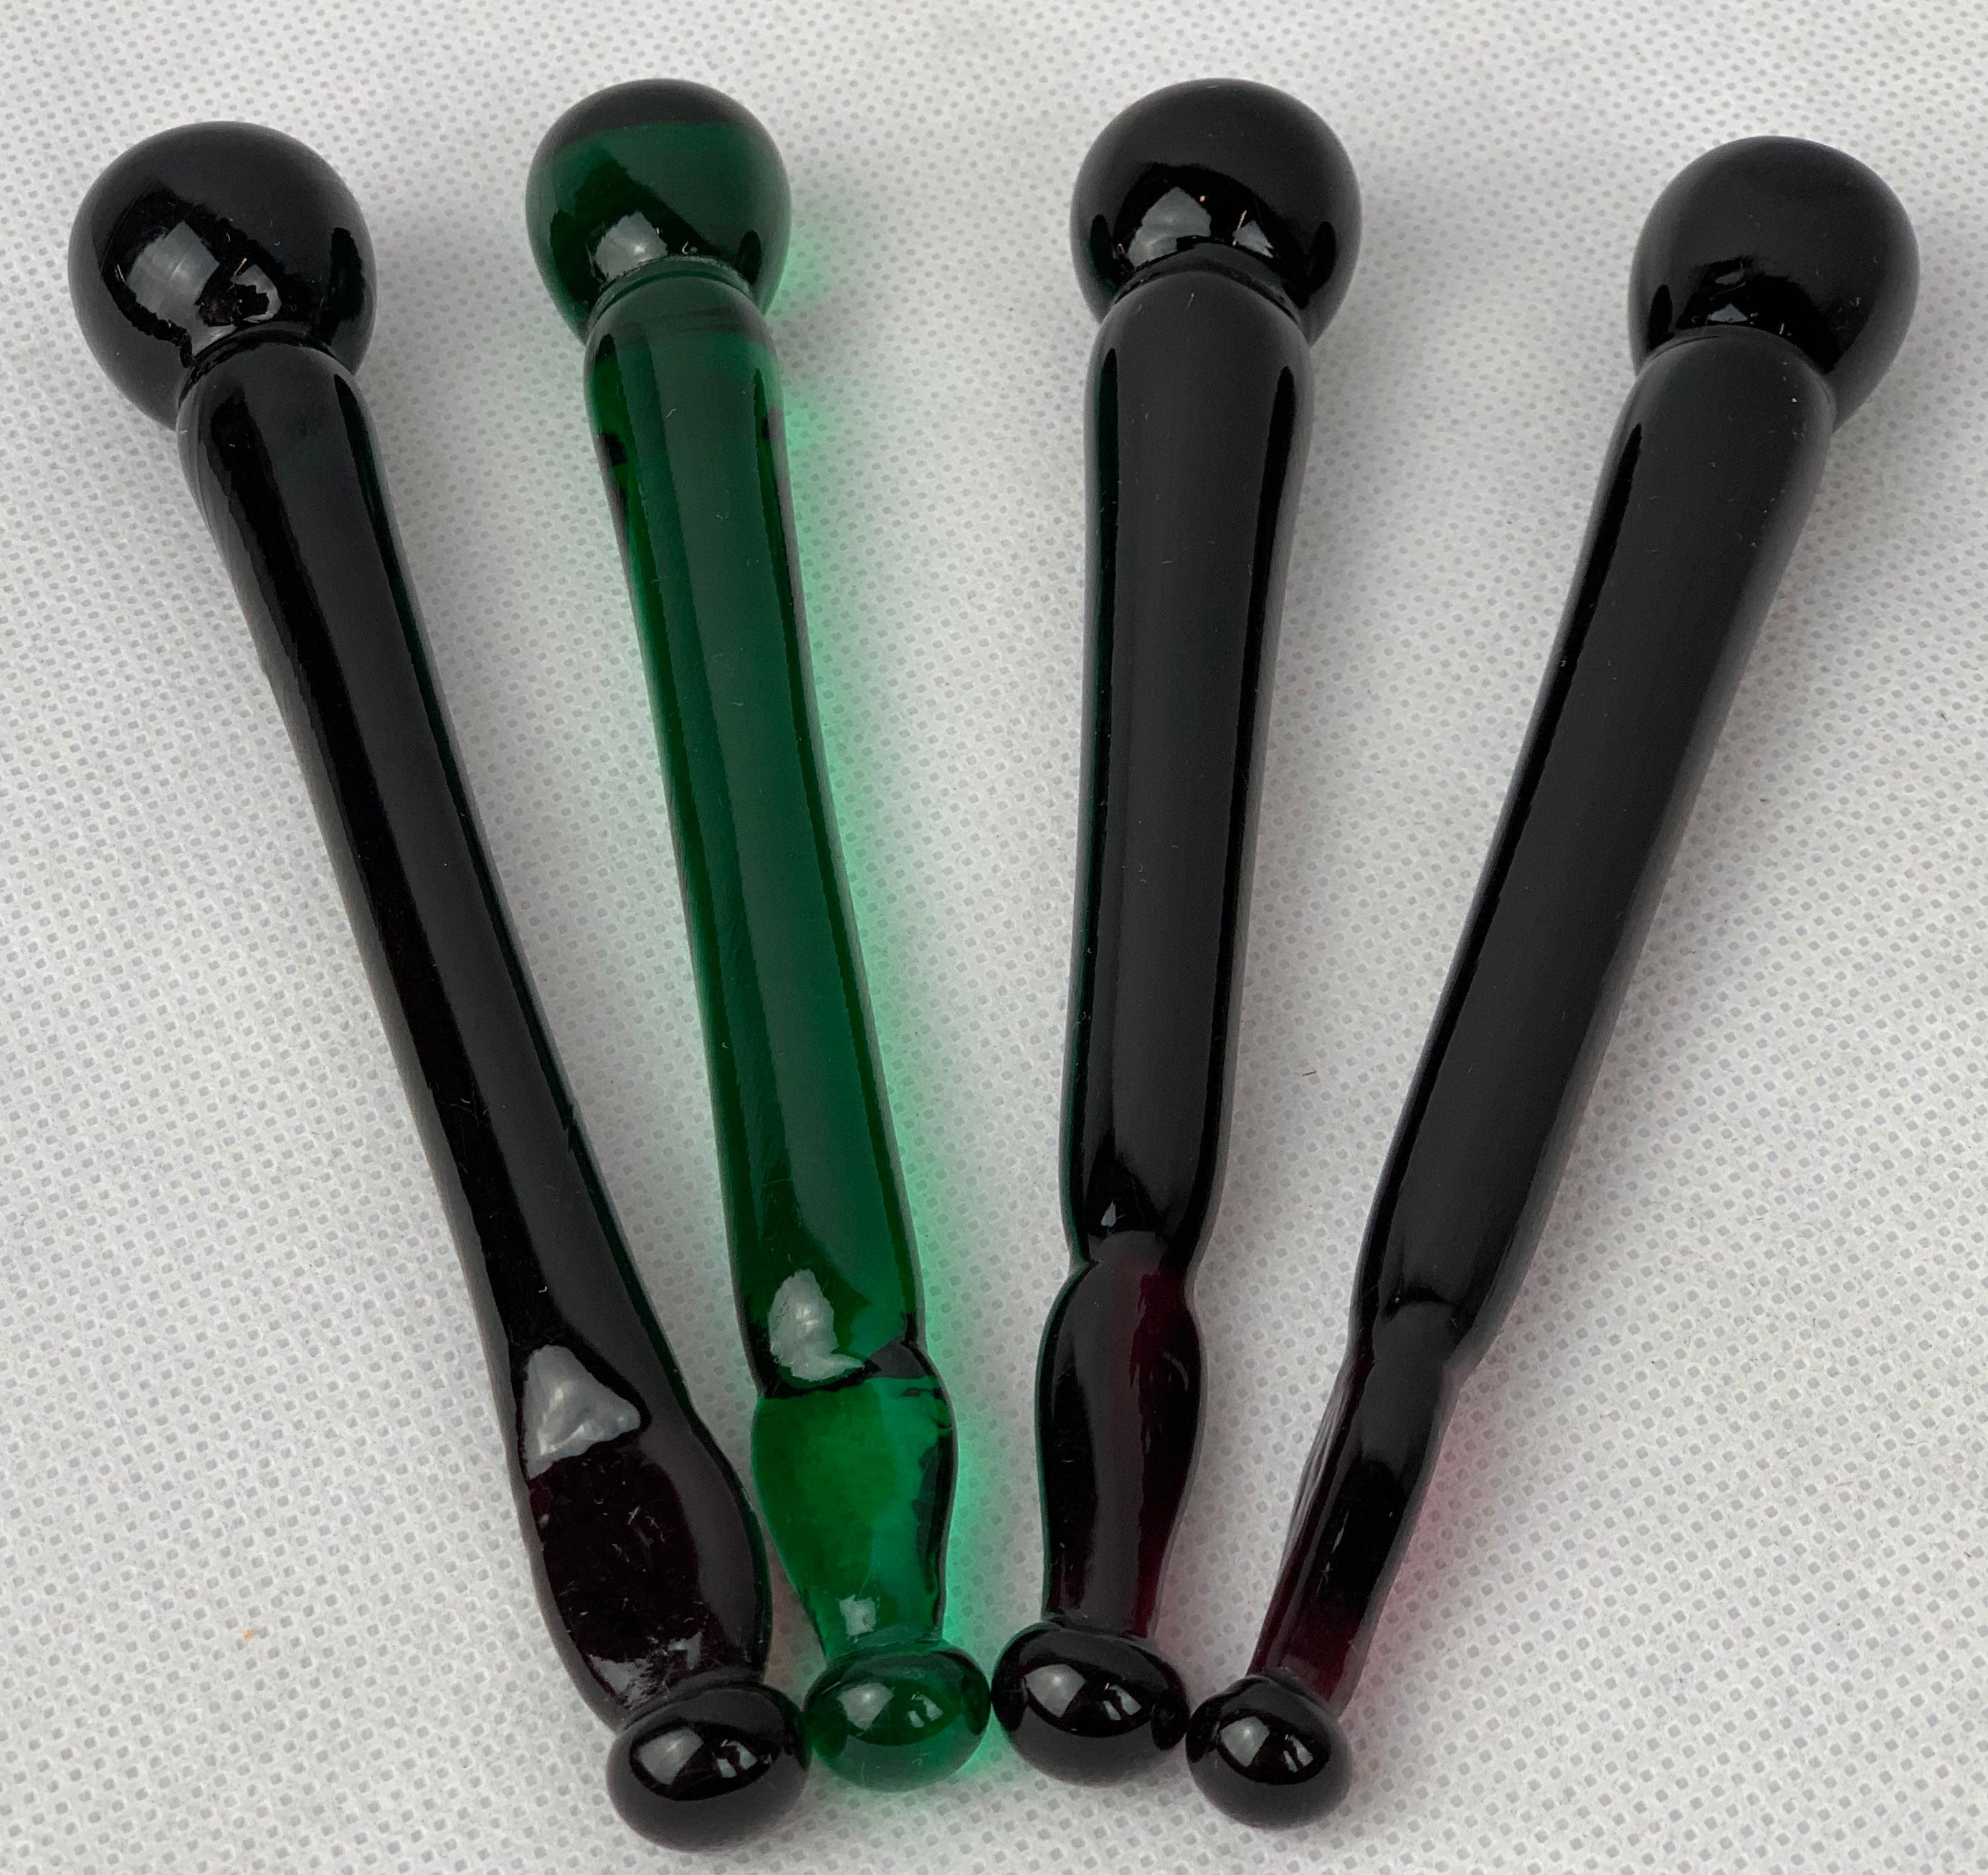 Set of four antique glass cocktail muddlers in dark purple and emerald green. They are a great bartender’s tool and sometimes called a swizzle stick. They usually have an enlarged tip useful for stirring drinks, crushing fruit, herbs and spices all